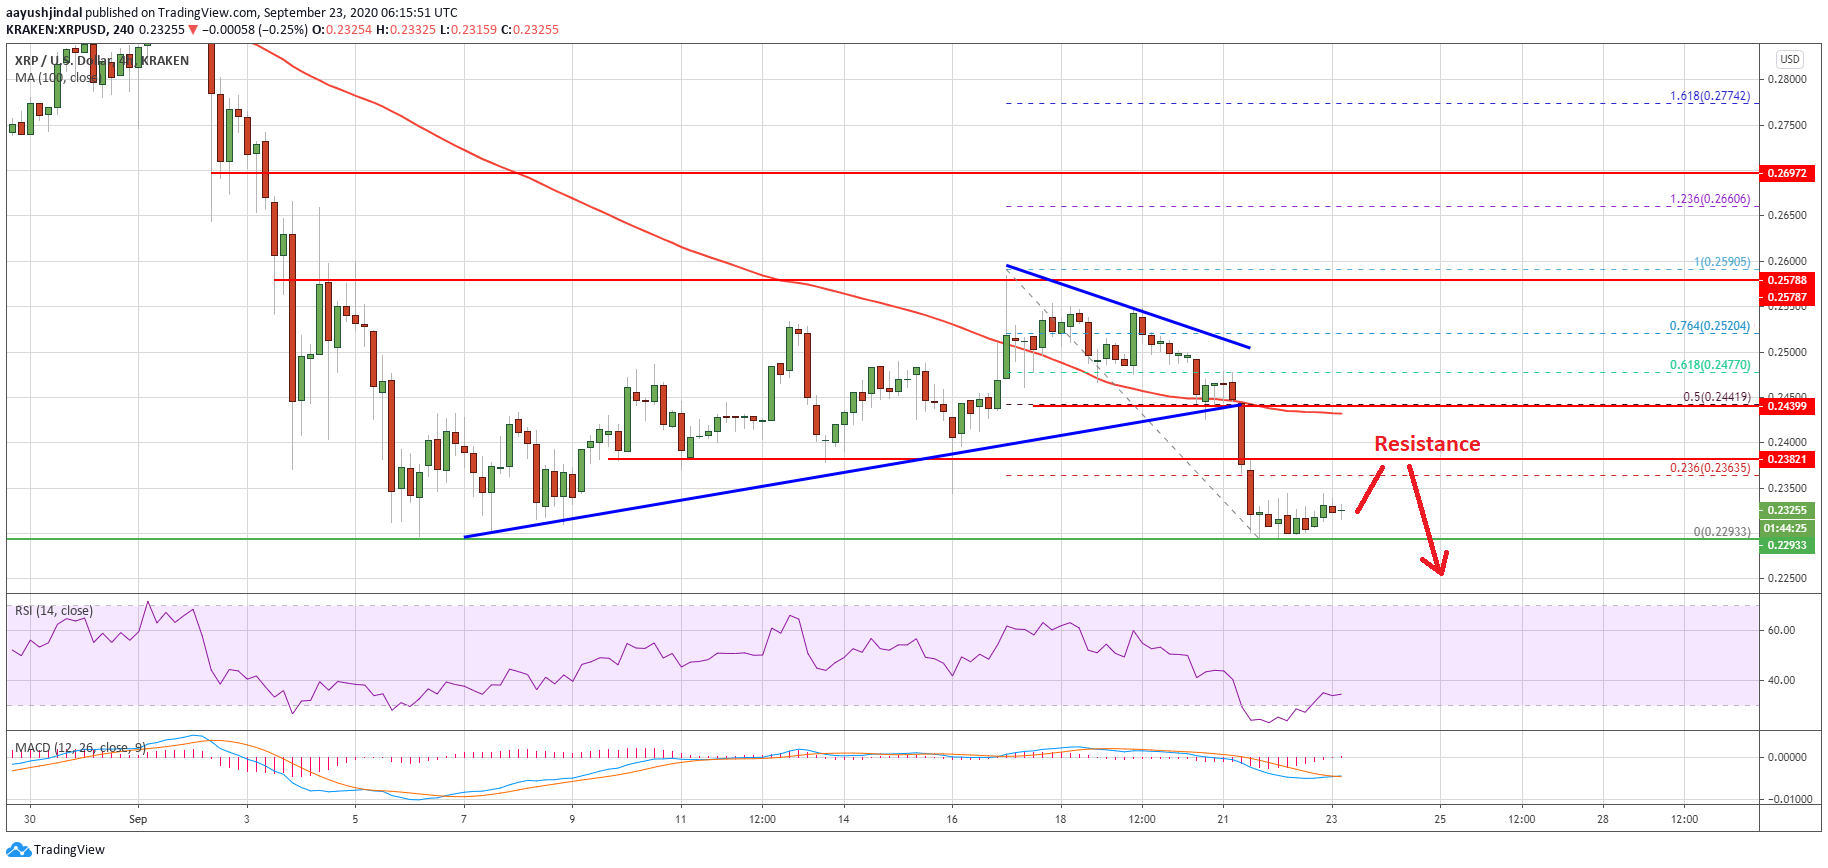 Ripple (XRP) Near Crucial Juncture: Here’s Why It Could Decline Sharply